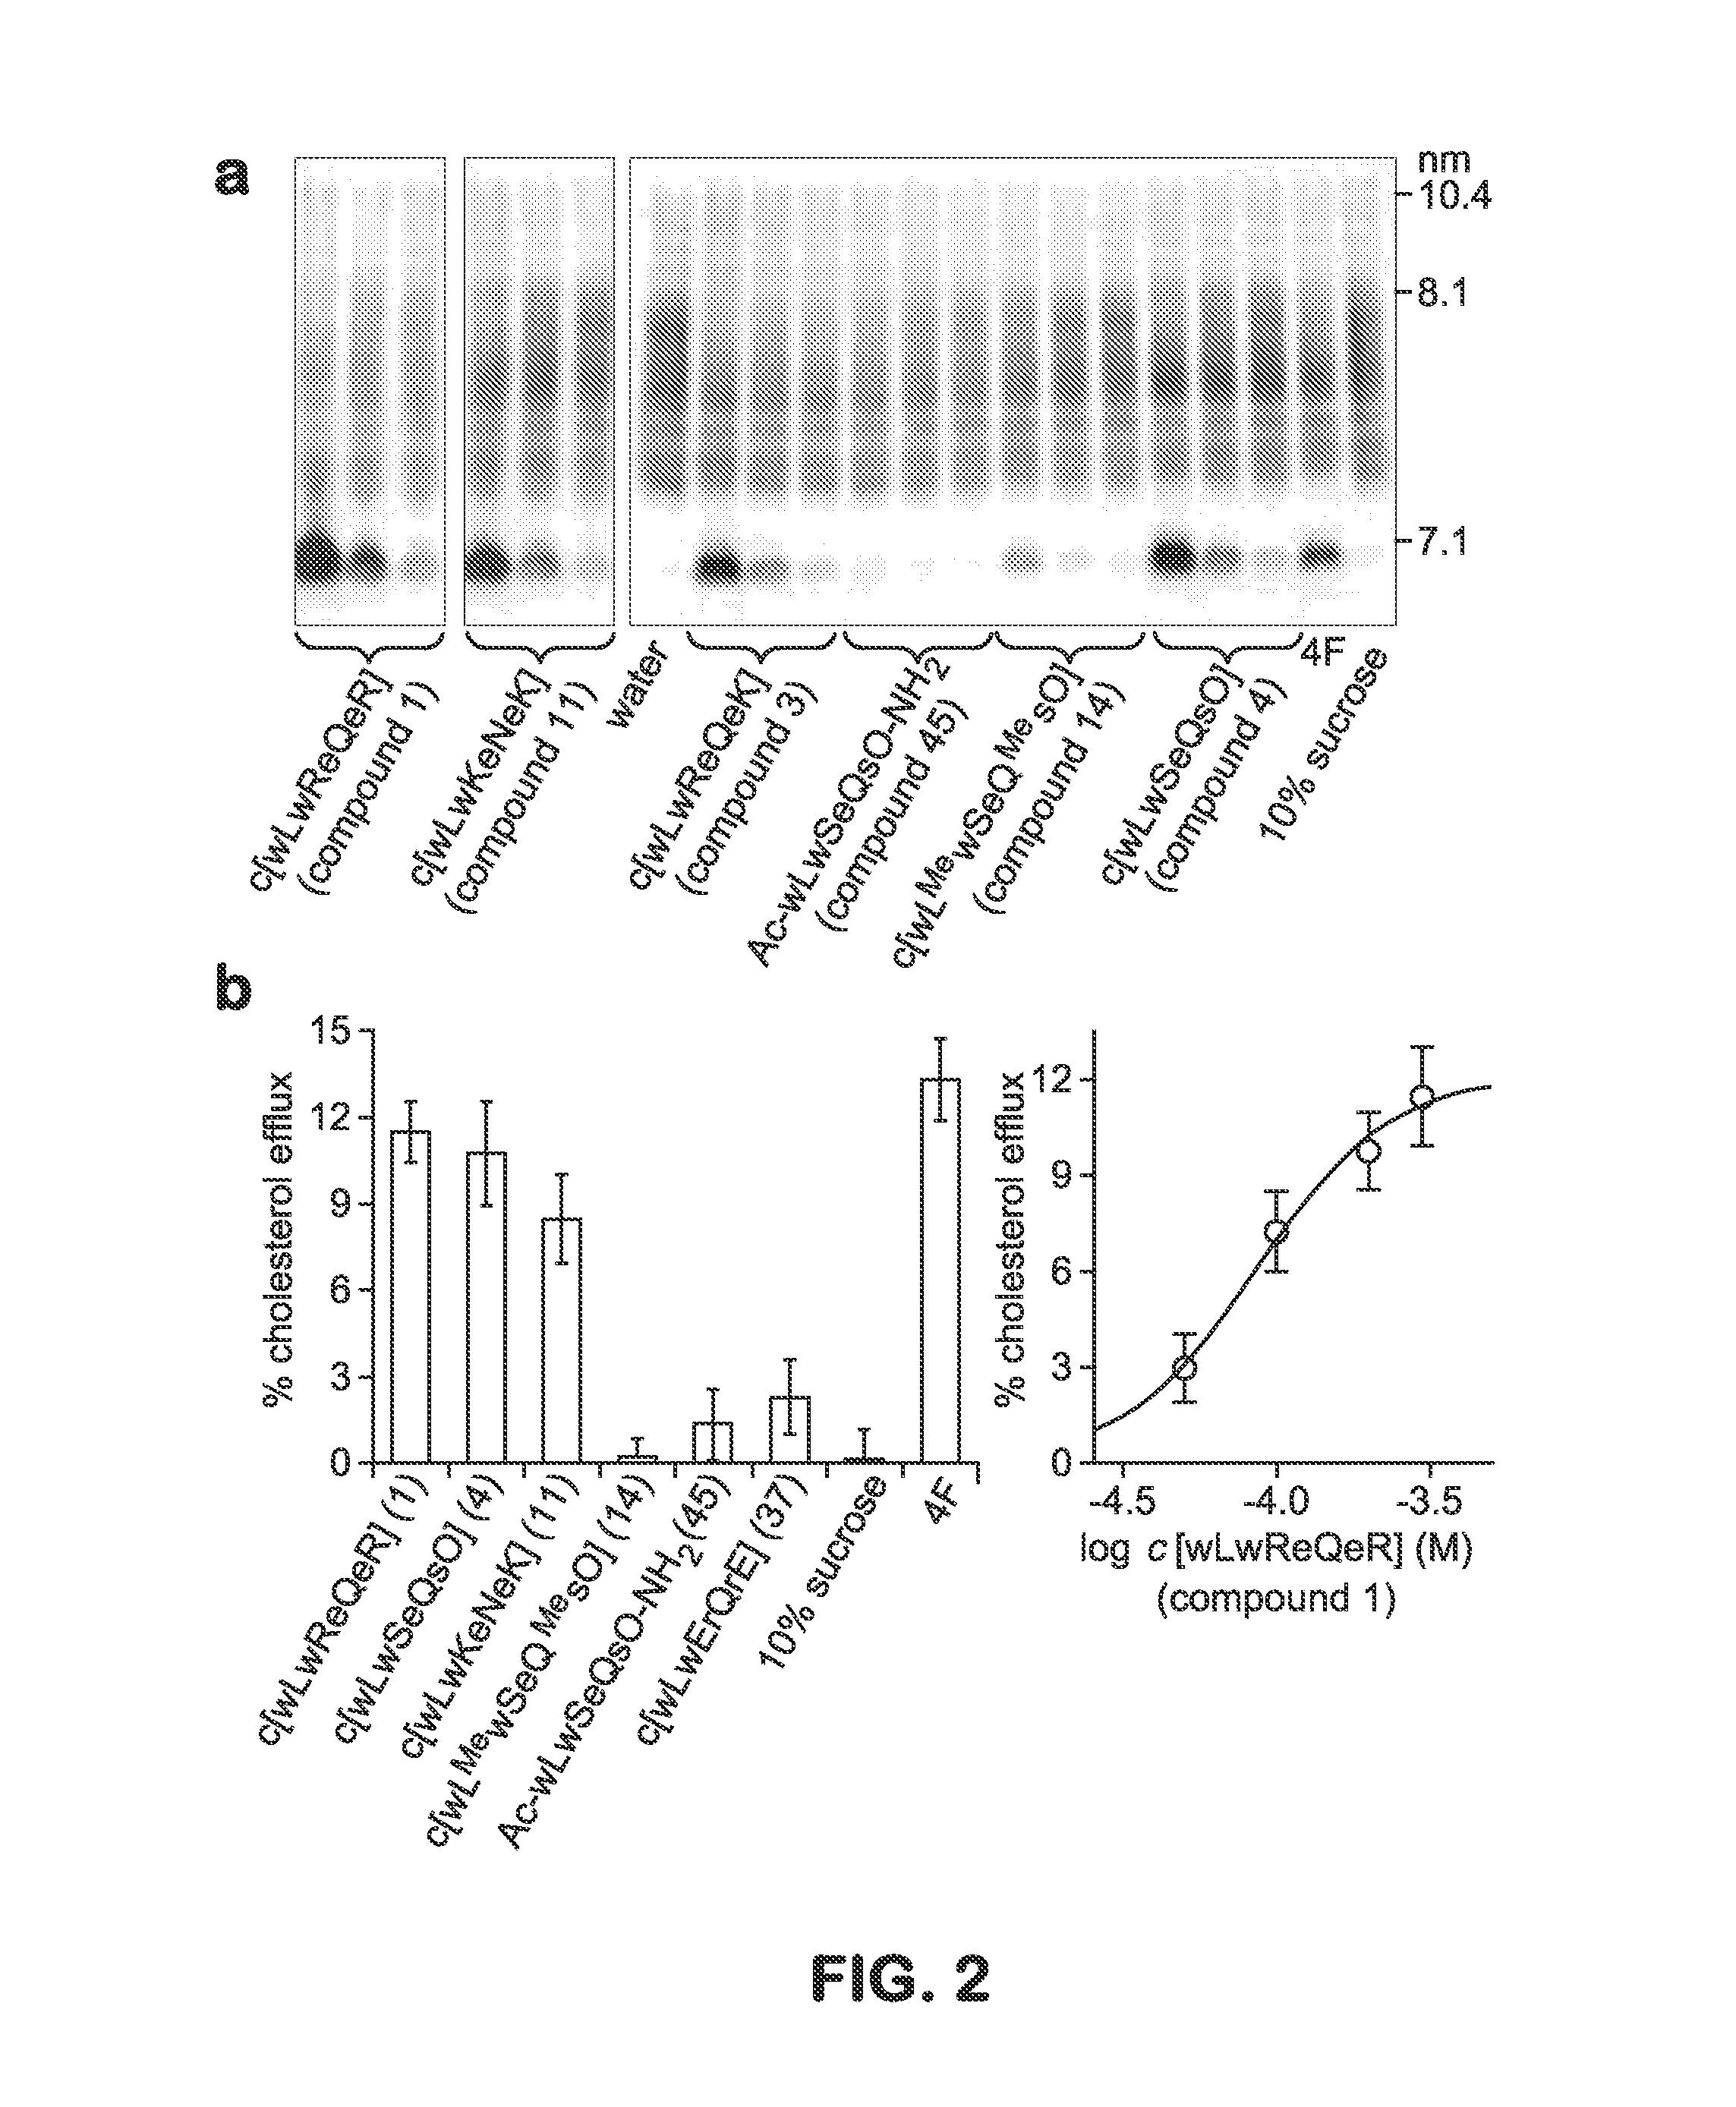 Uses Of Cyclic Peptides For Treating And Preventing Atherosclerosis
Uses of Cyclic Peptides for Treating and Preventing Atherosclerosis